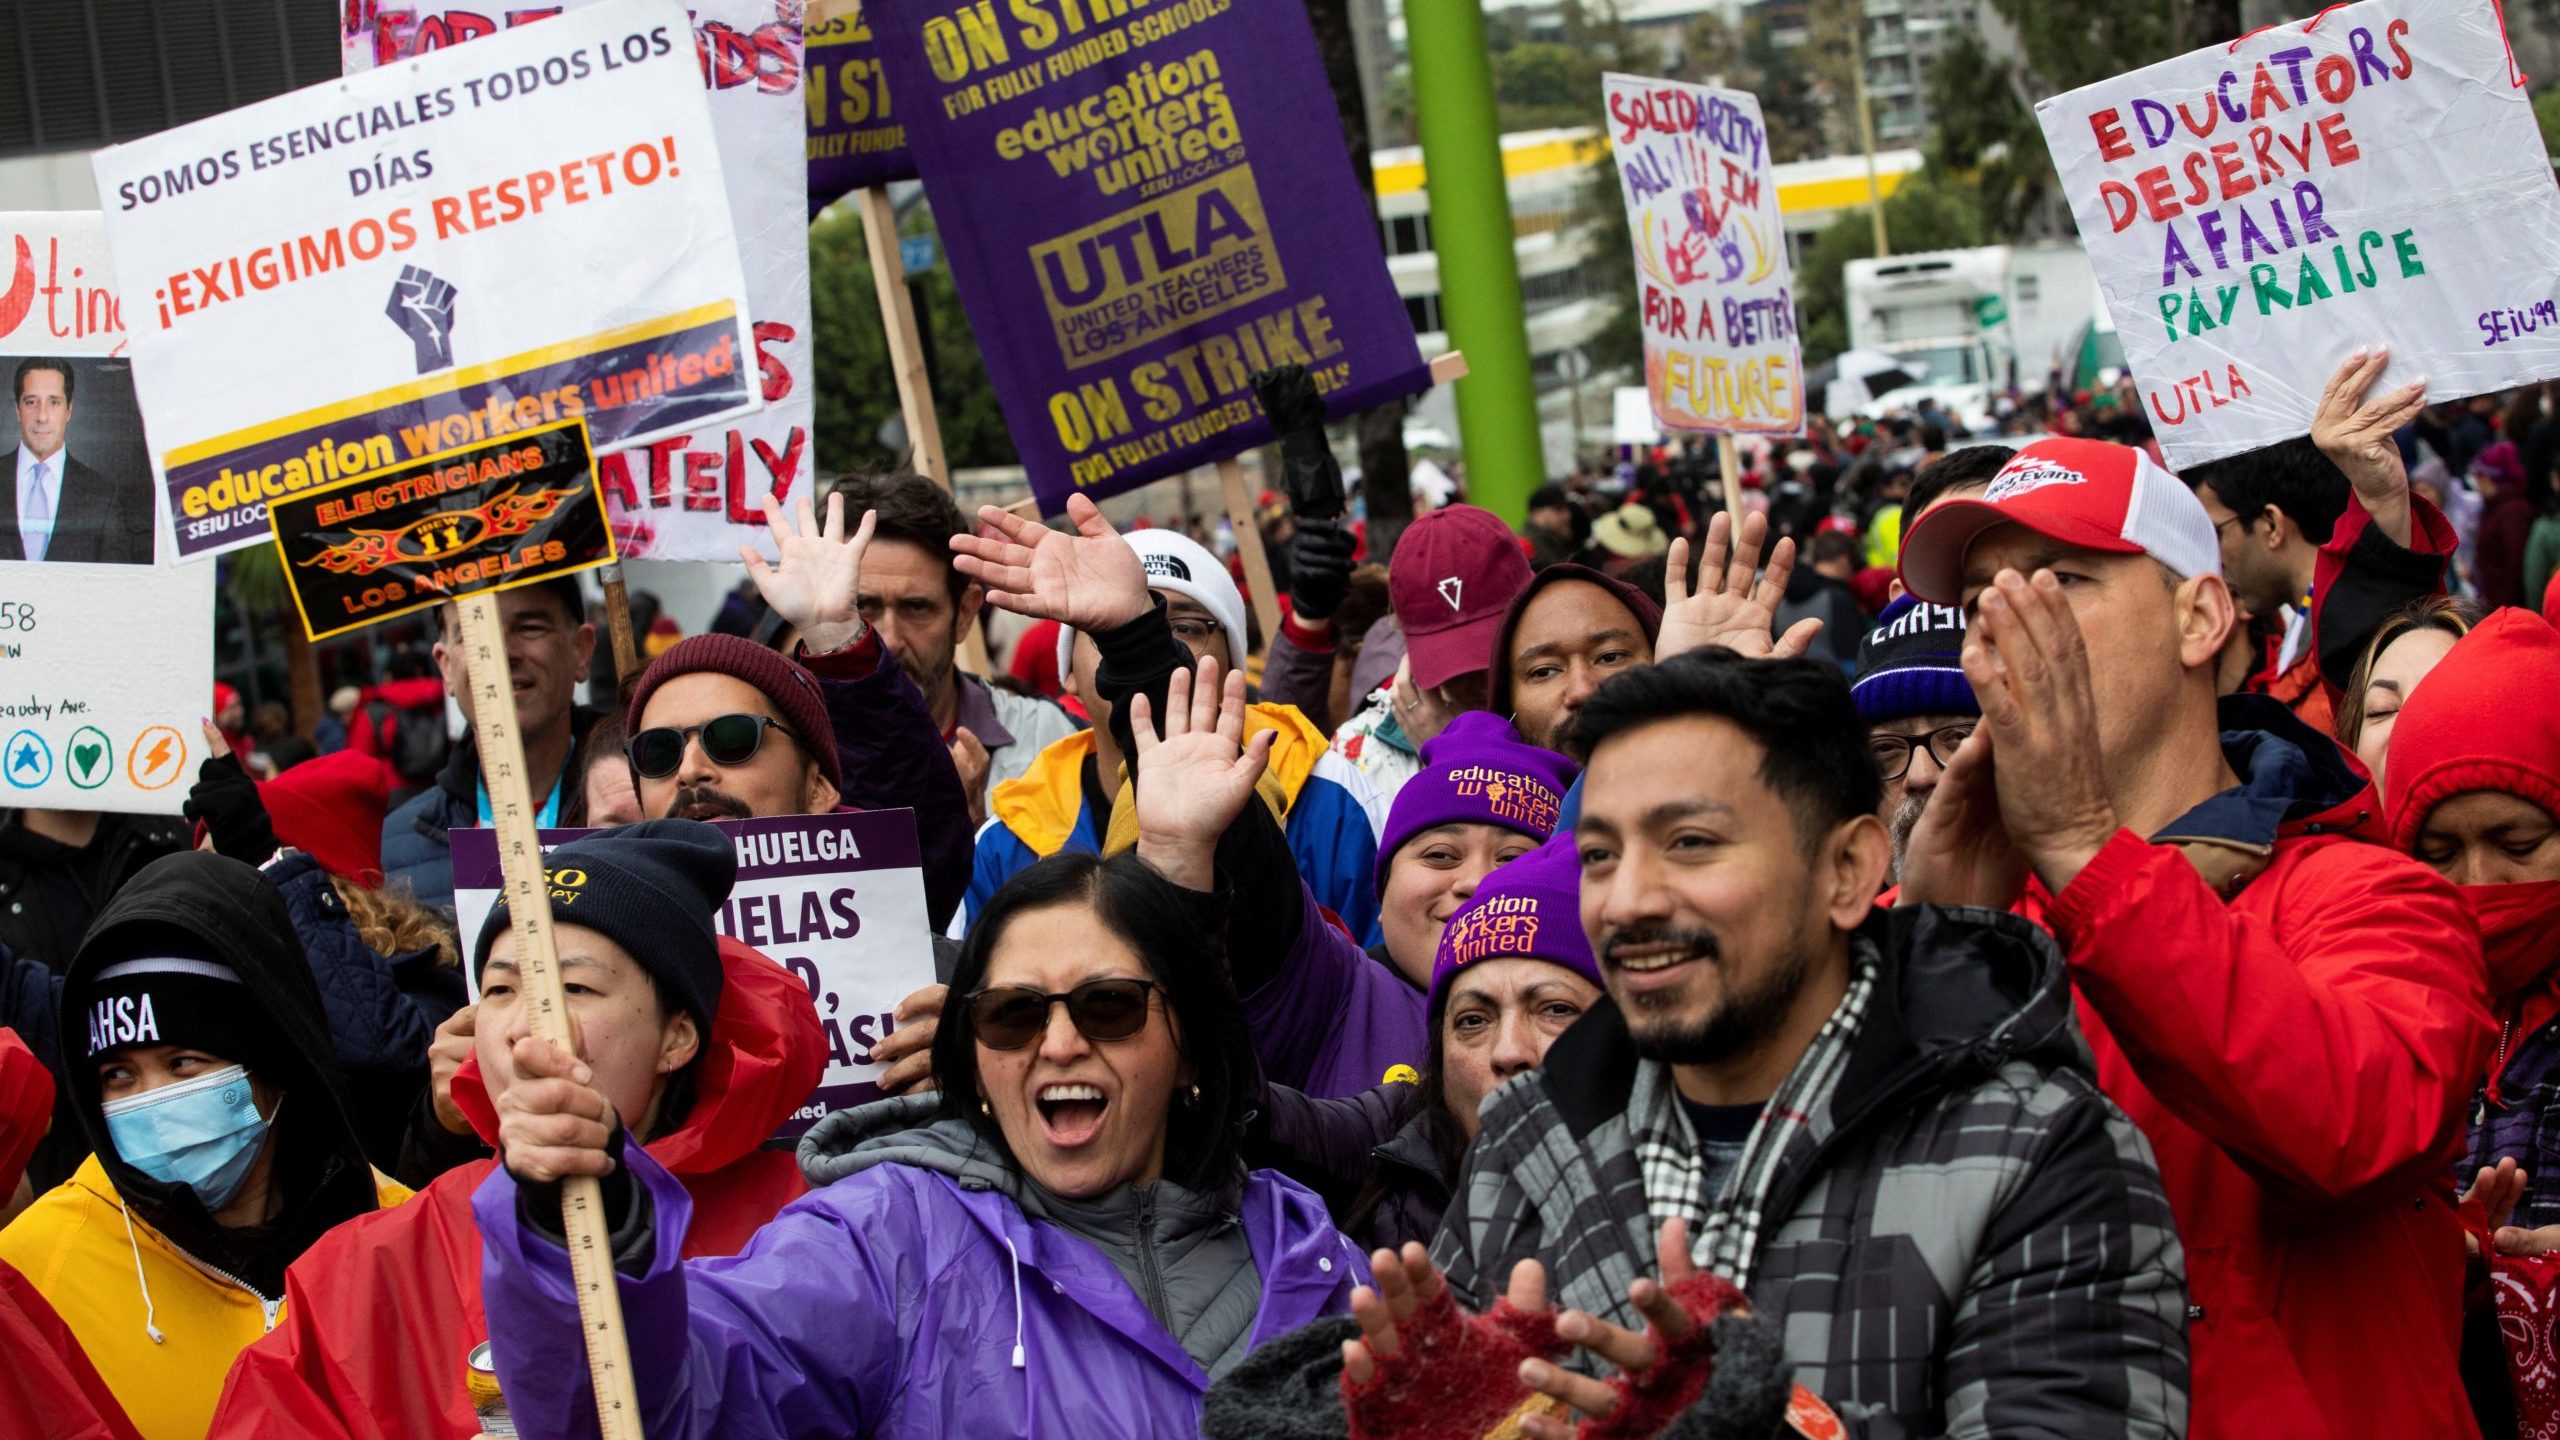 LAUSD strike settlement victory for workers, human dignity